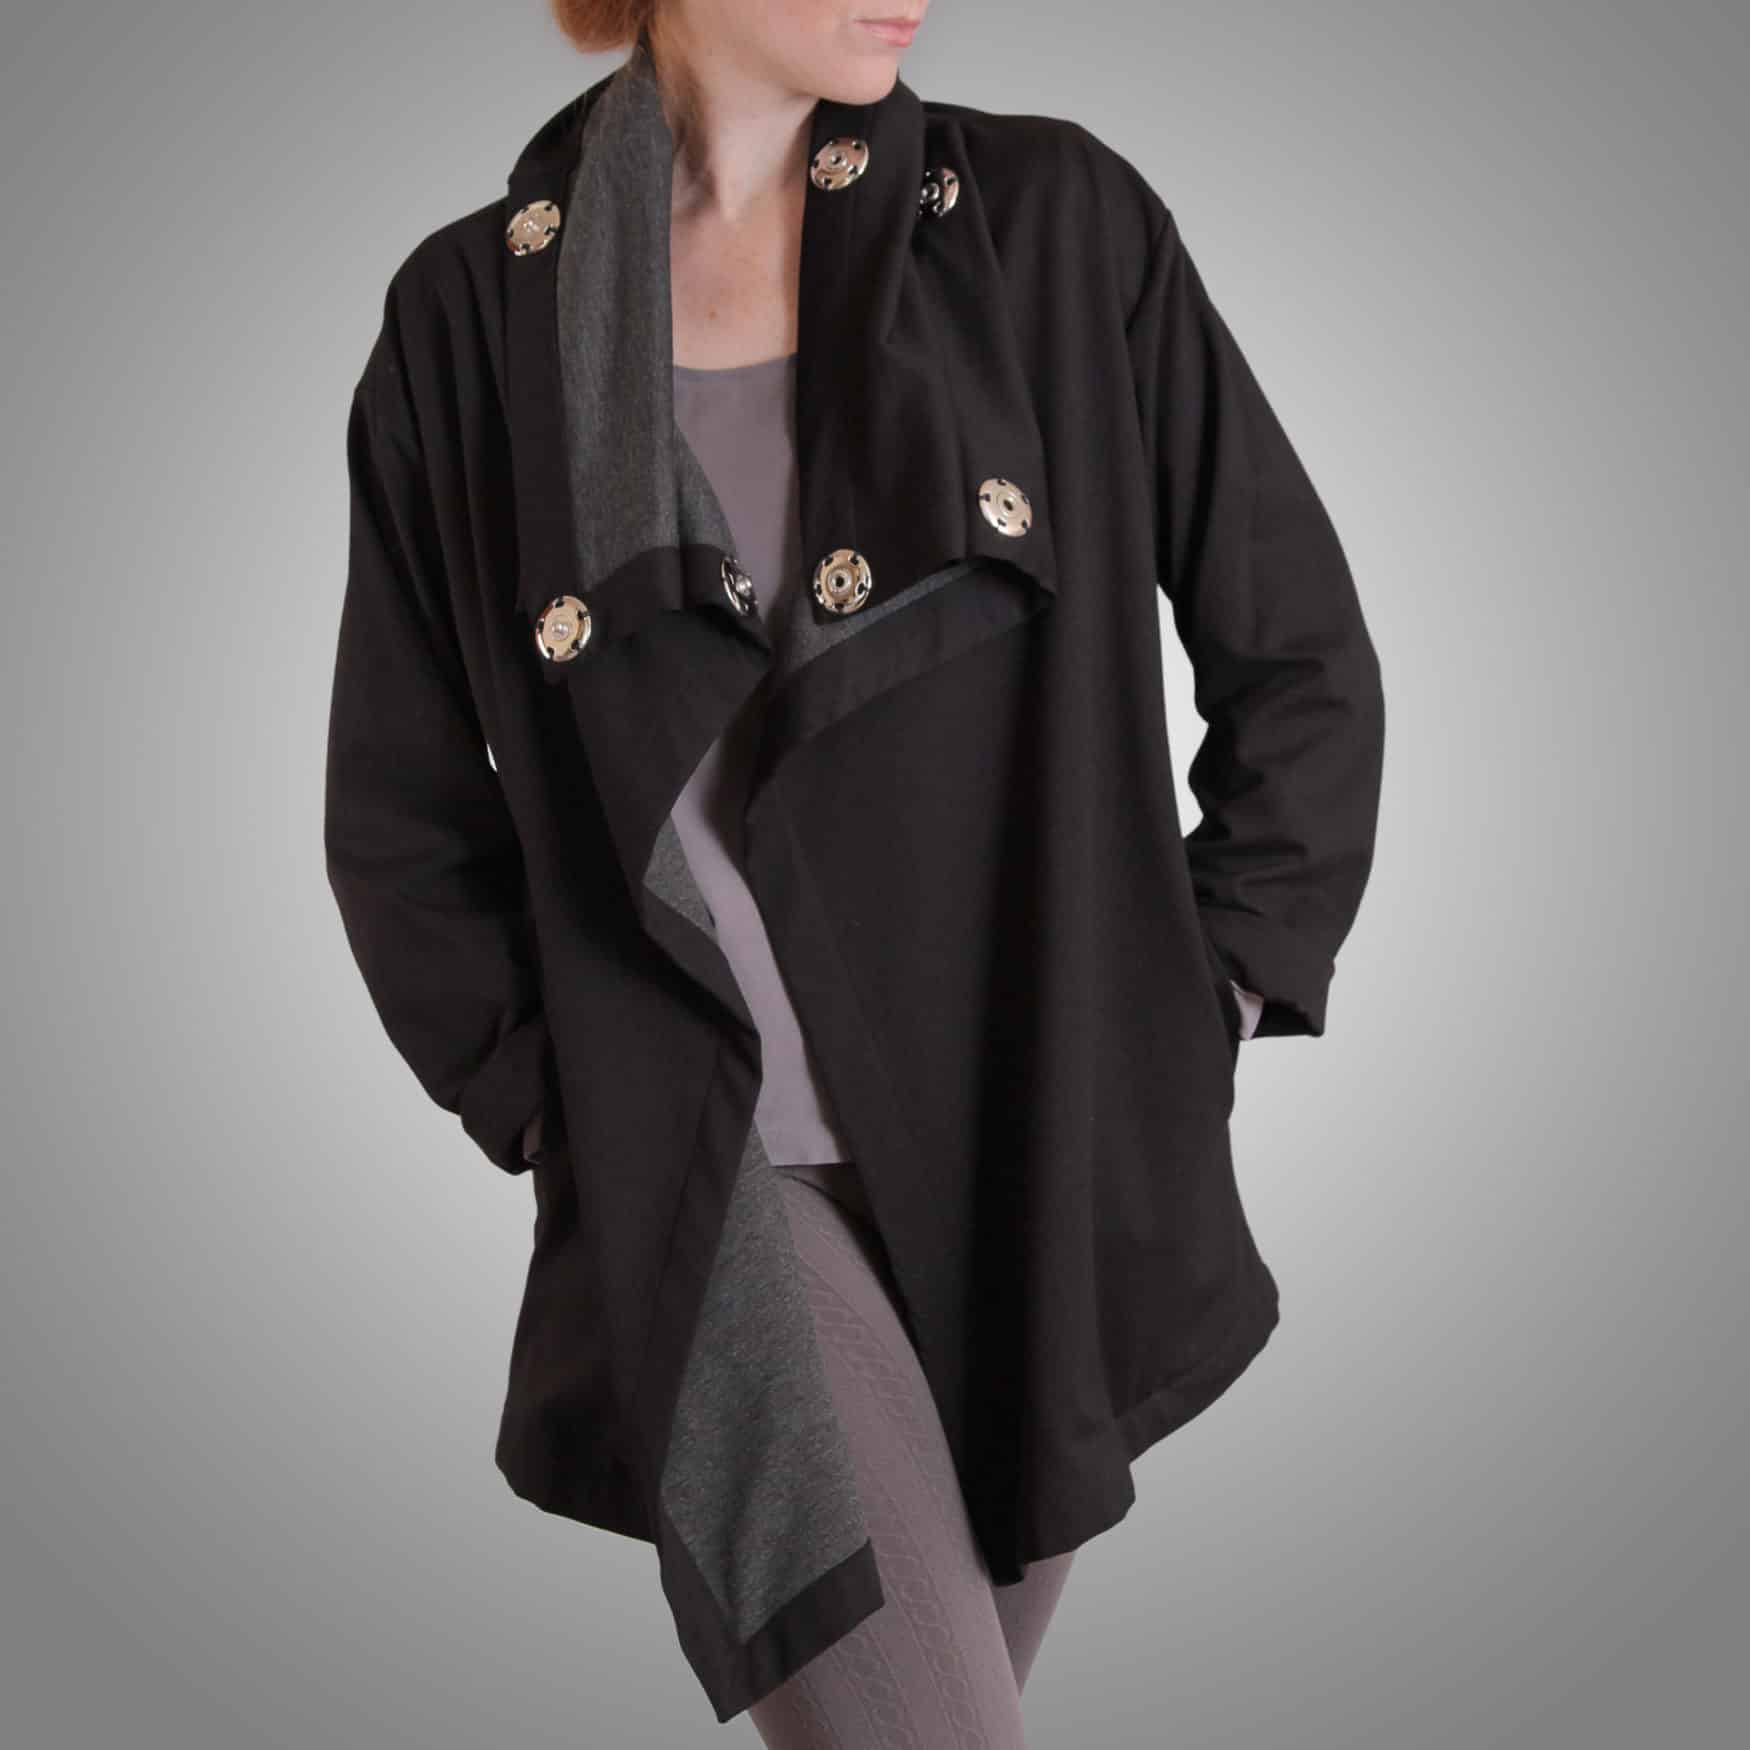 Black yoga jacket with large silver snaps